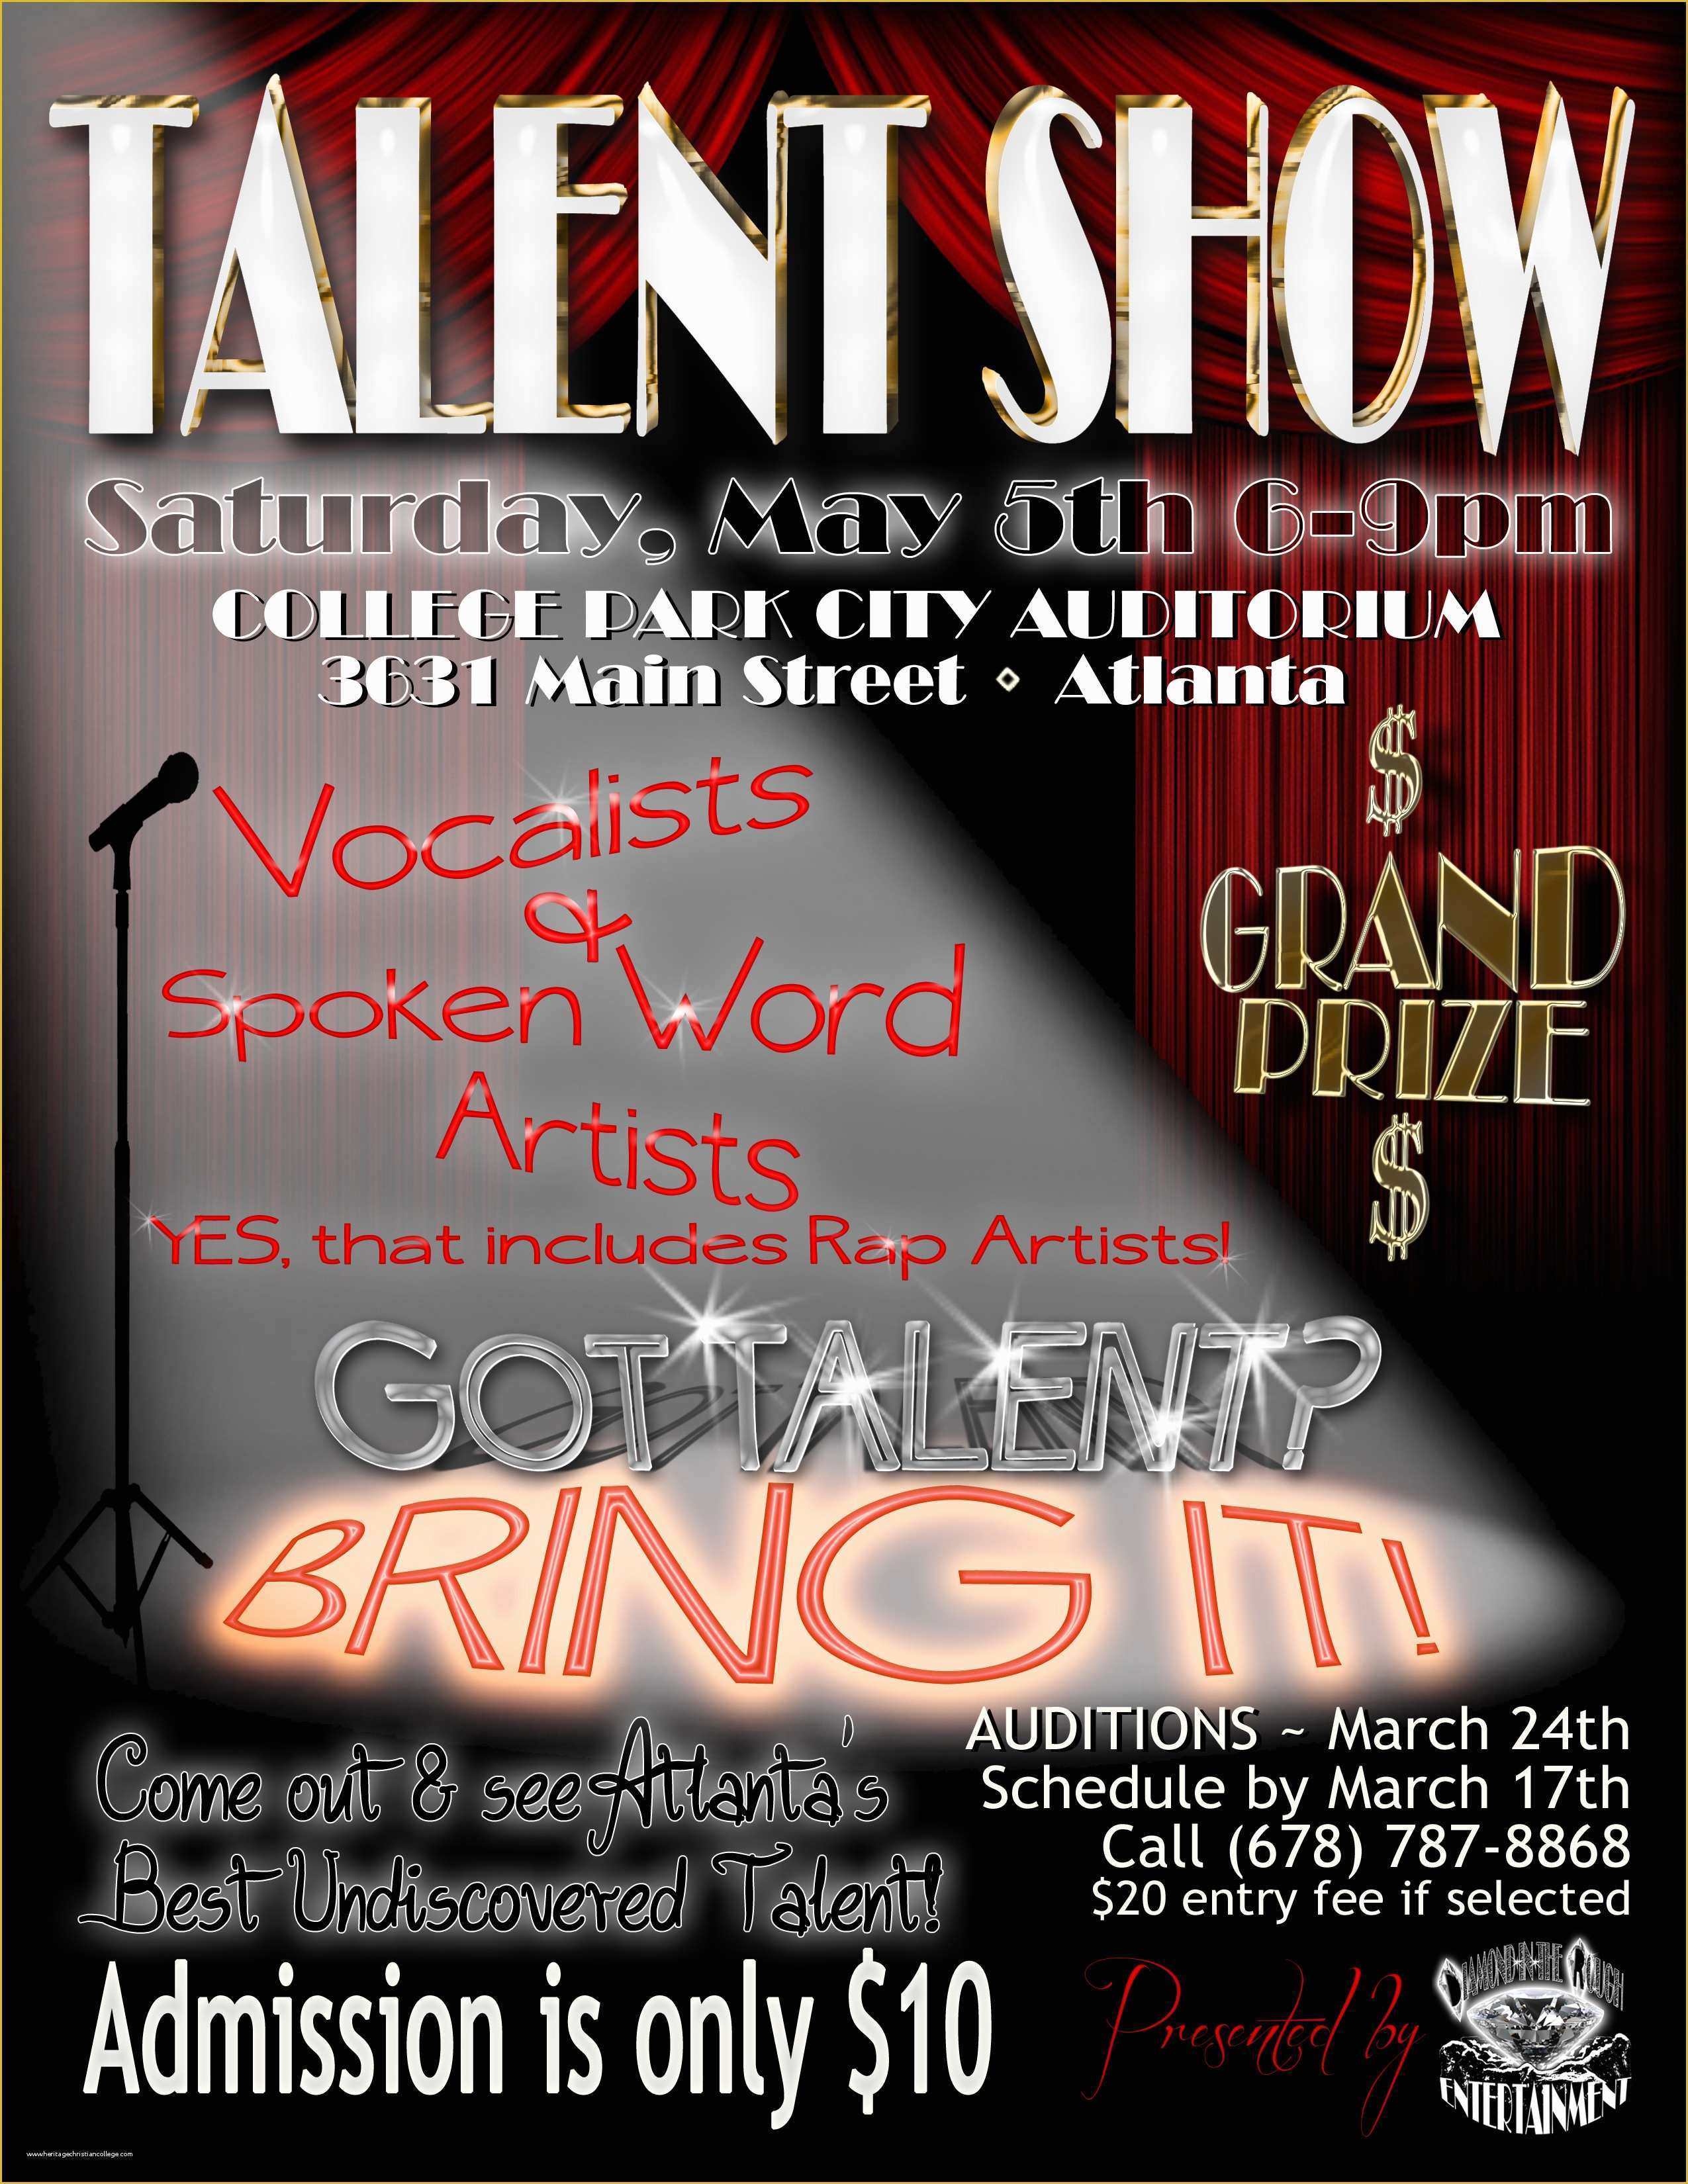 Free Printable Talent Show Flyer Template Of Custom Design Of Business Media for Print or Web